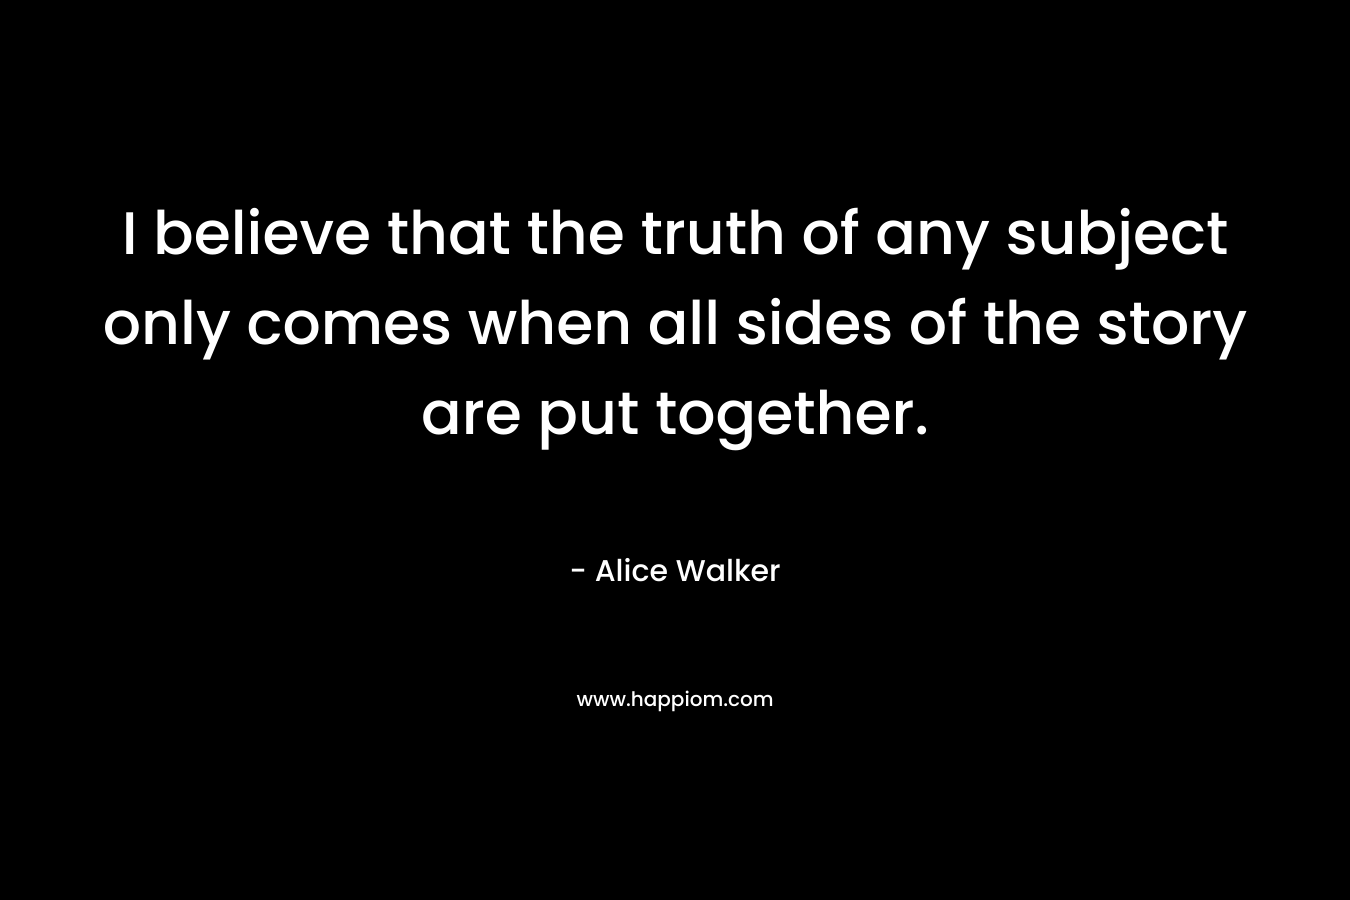 I believe that the truth of any subject only comes when all sides of the story are put together.